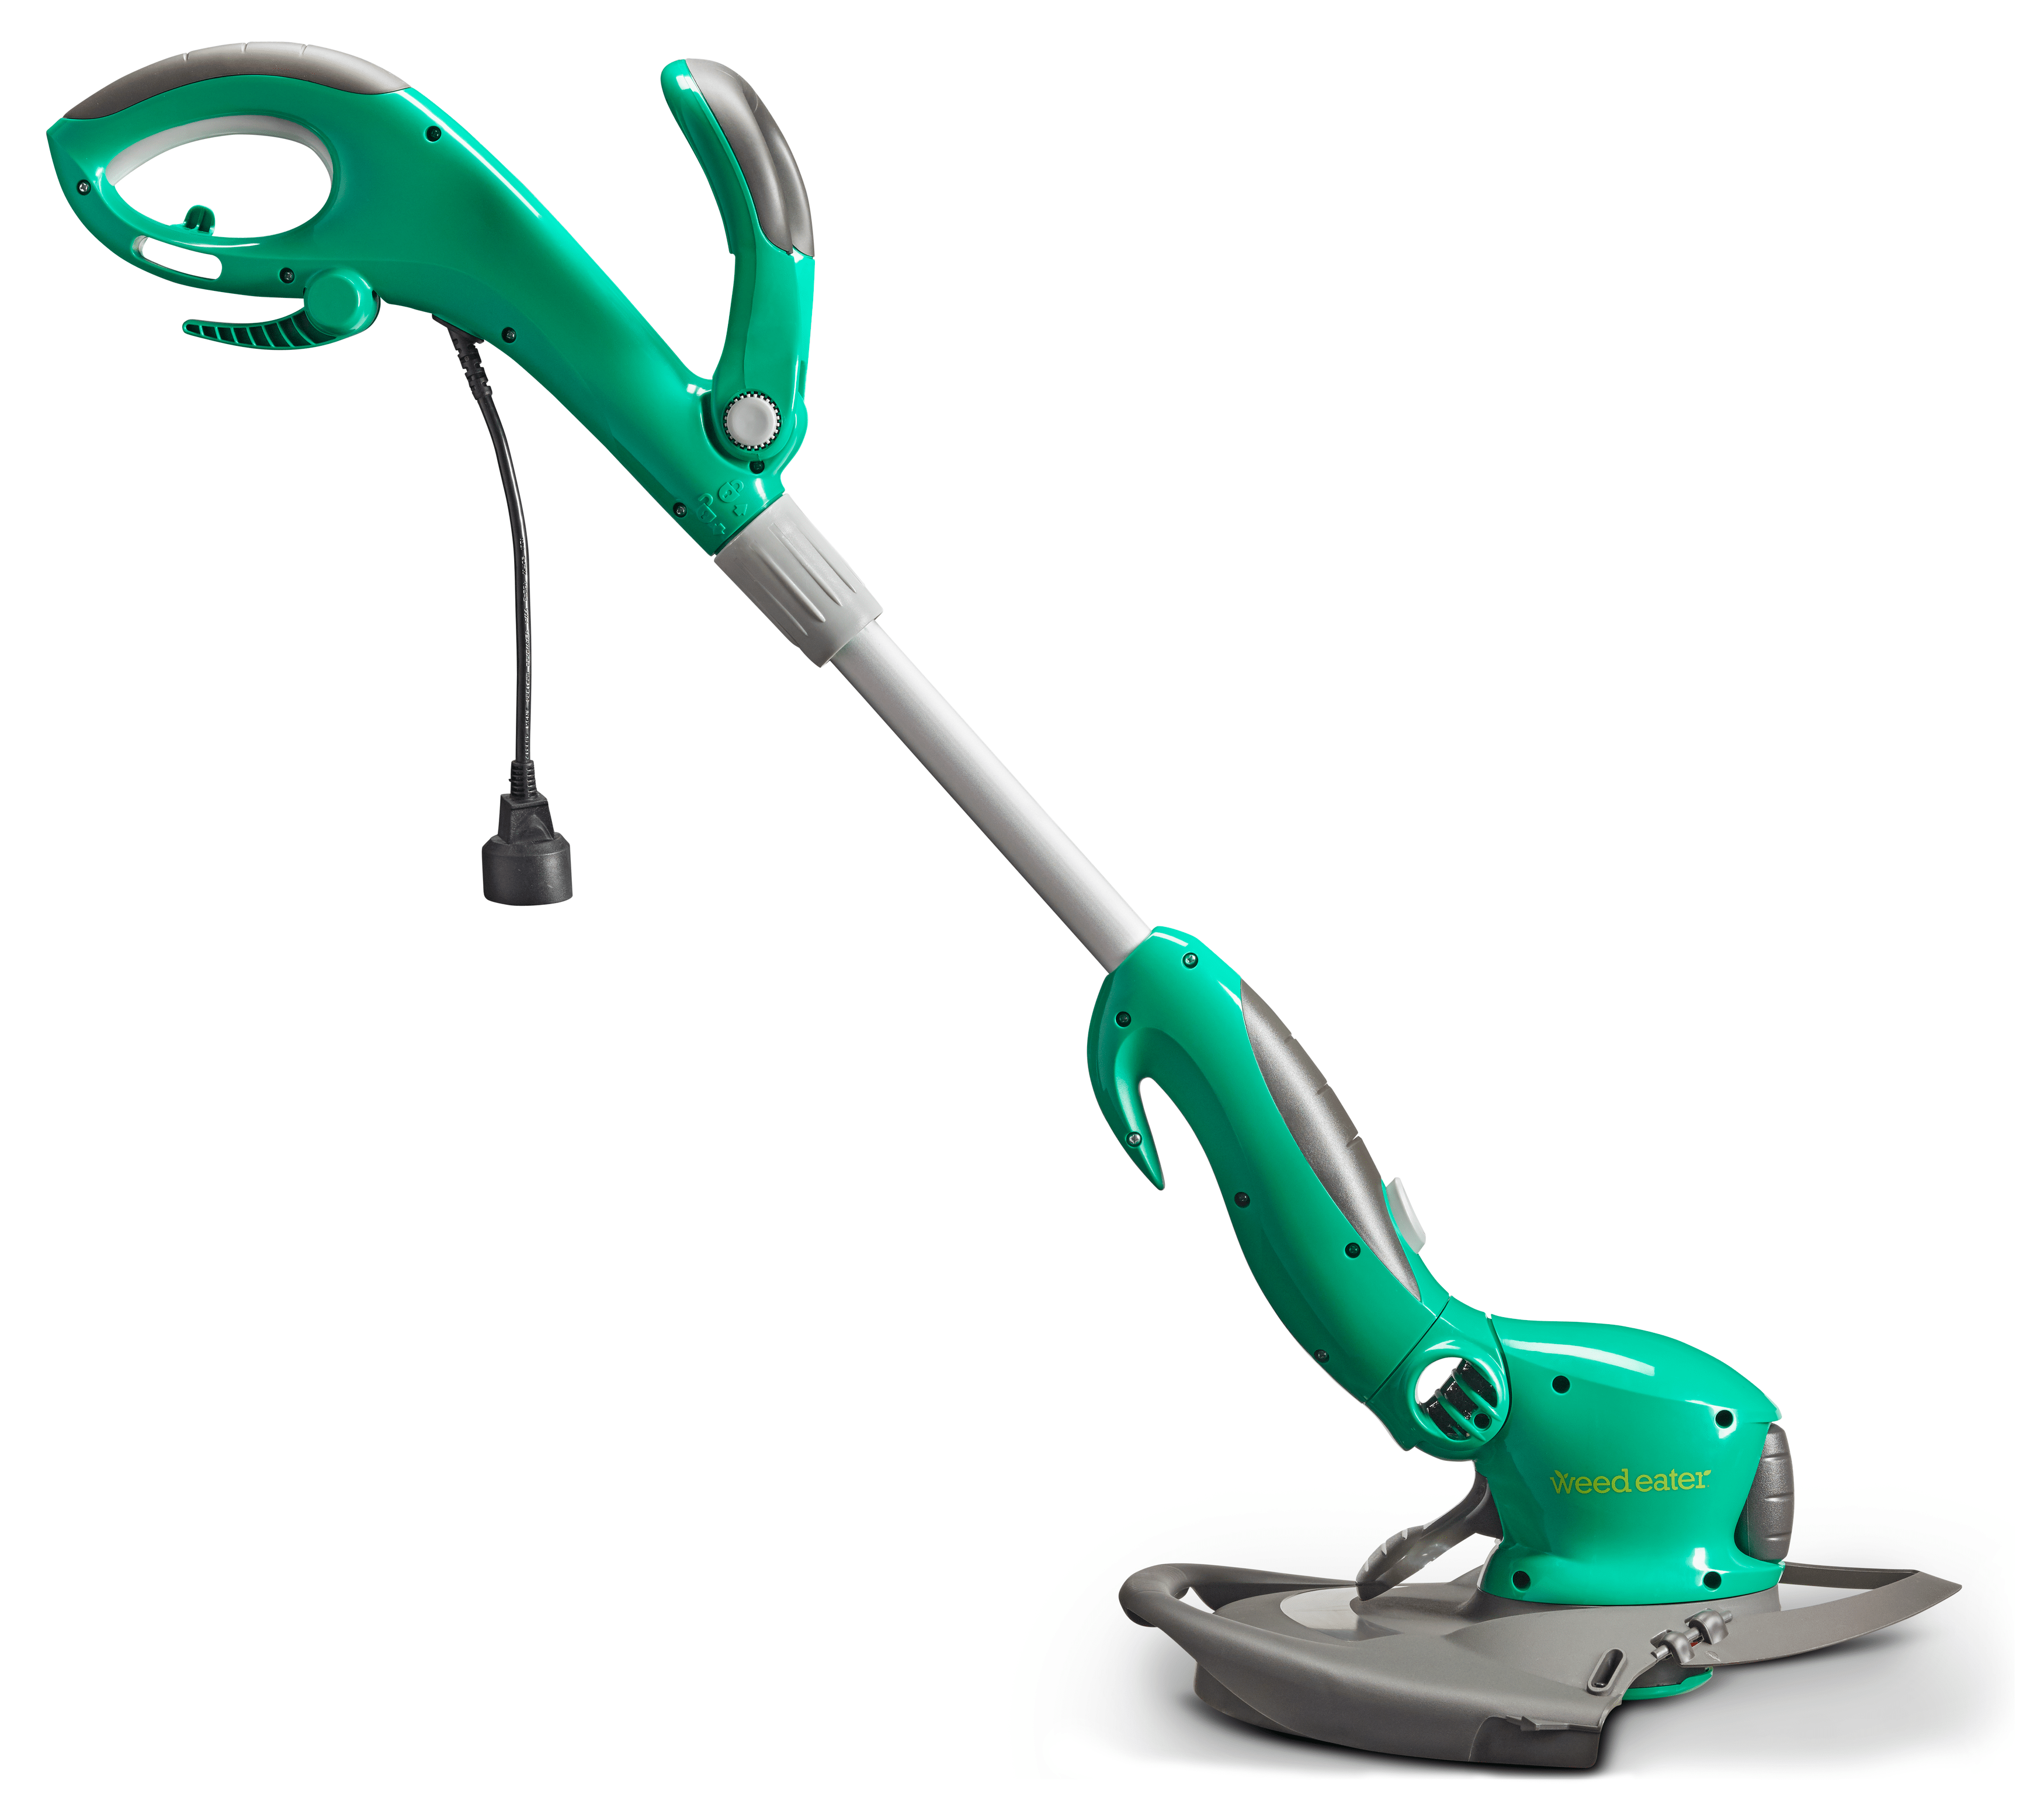 corded electric weed eater